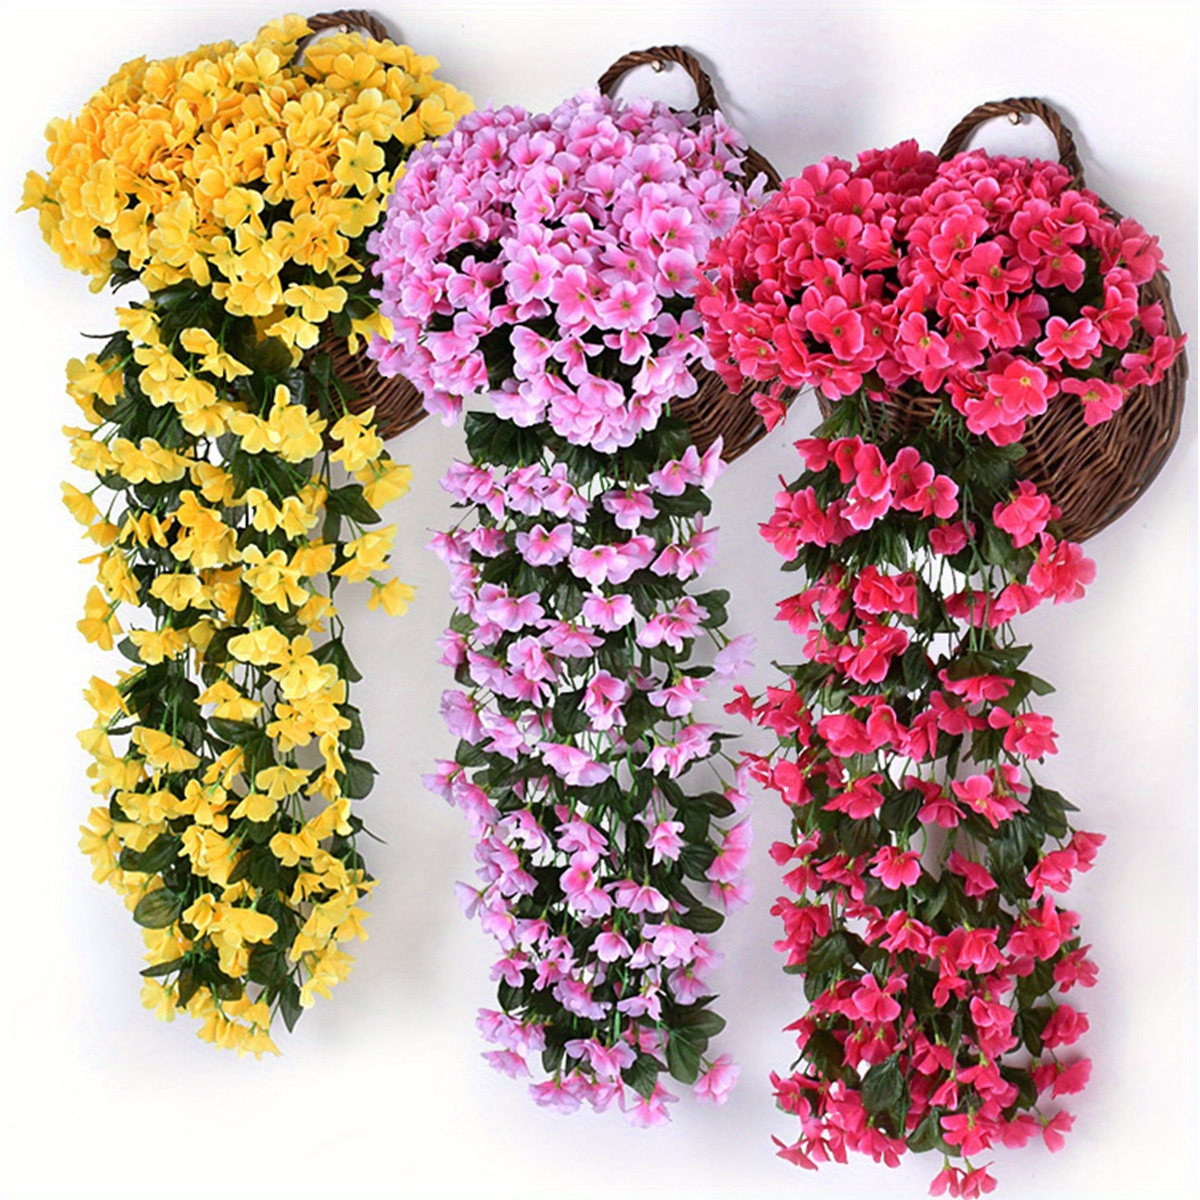 

2pcs 31.49 Inch Violet Ivy Flowers Lifelike Hanging Plant Artificial Hanging Flowers Decorations For Outdoor Home Wedding Garden Yard Hanging Baskets Wisteria Garland Decoration